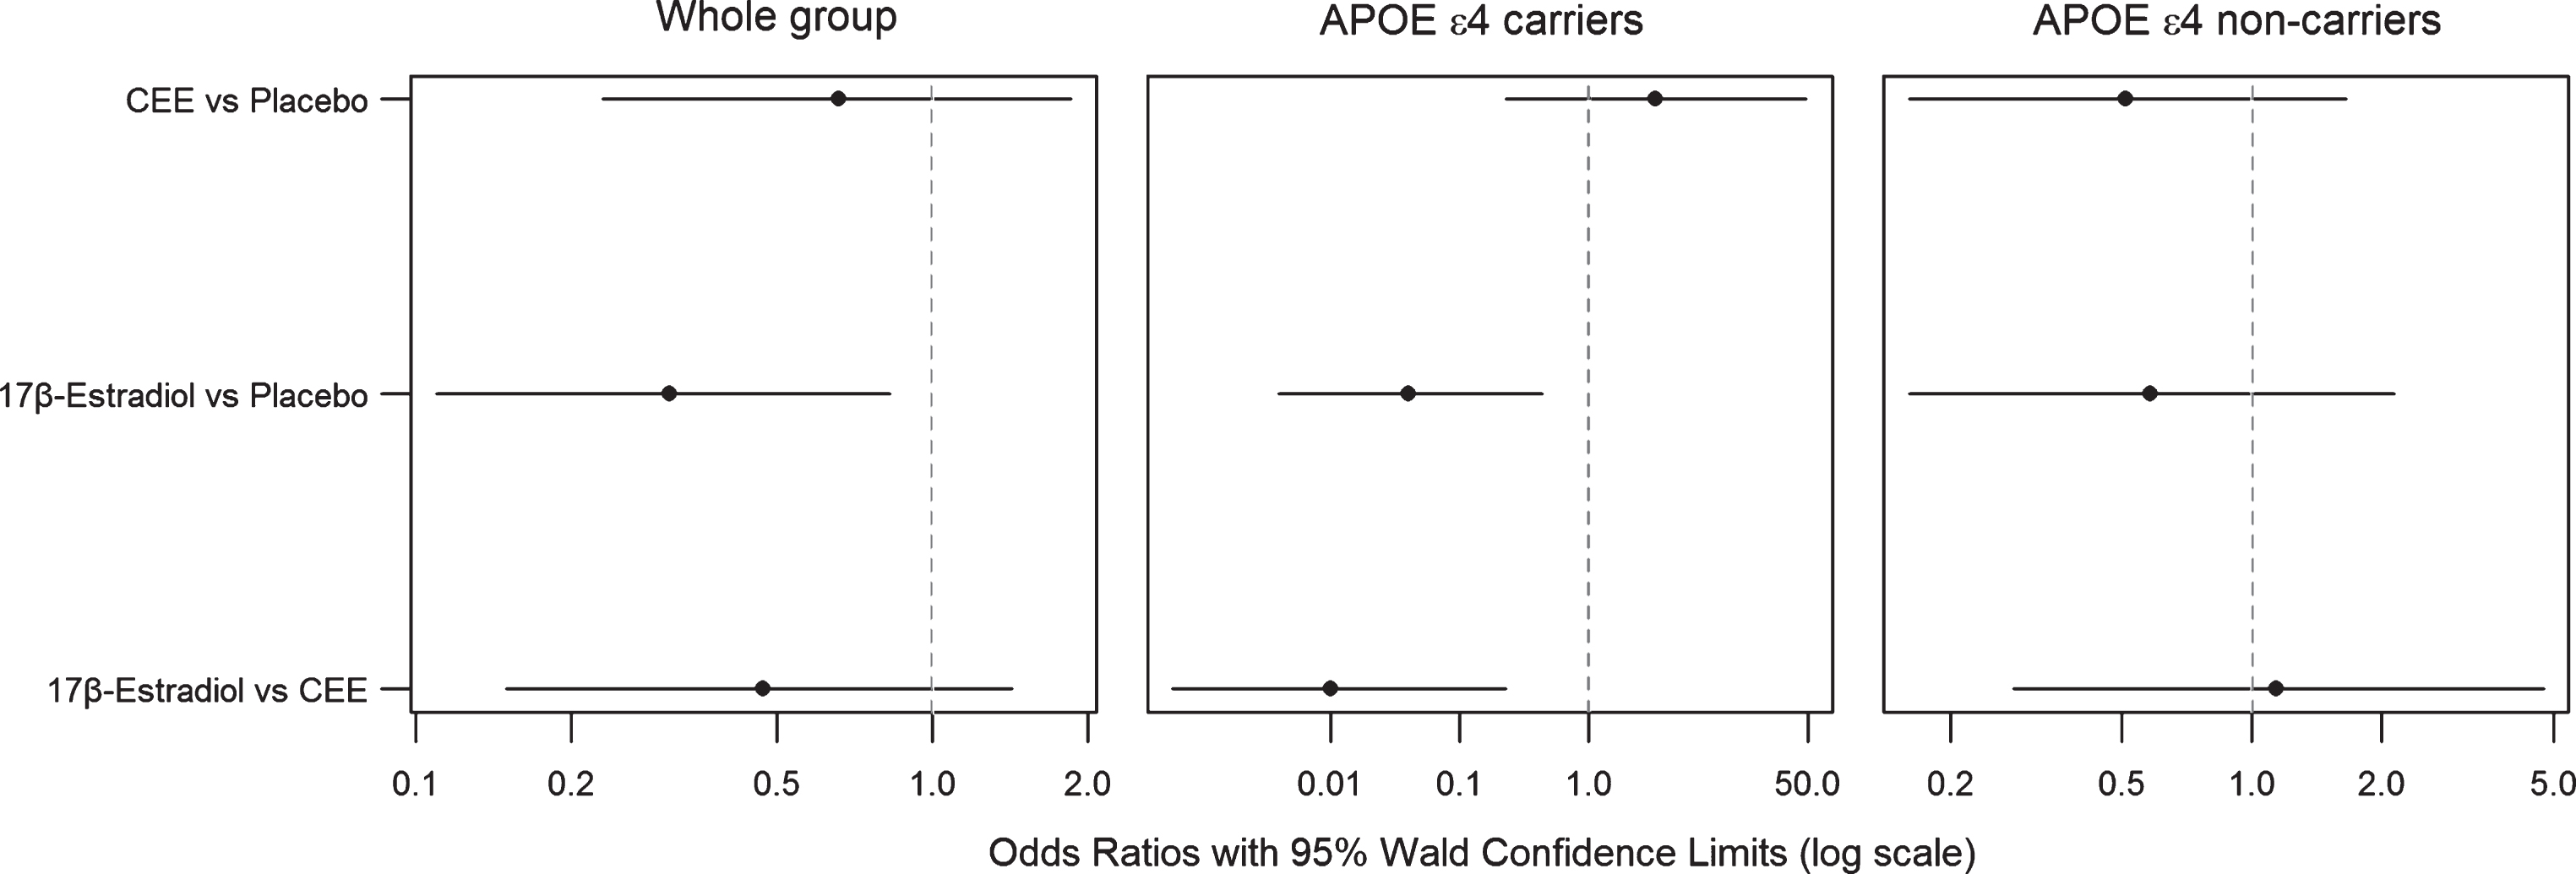 Odds ratios for PiB SUVR from proportional odds logistic regression models and 95% Wald confidence limits comparing PiB SUVR in oral CEE, transdermal 17β-estradiol, and the placebo groups in the whole group of participants, in APOE ɛ4 carriers, and in APOE ɛ4 non-carriers after adjusting for age. The odds ratio axis is logarithmic to accommodate the entire range of 95% Wald confidence limits.